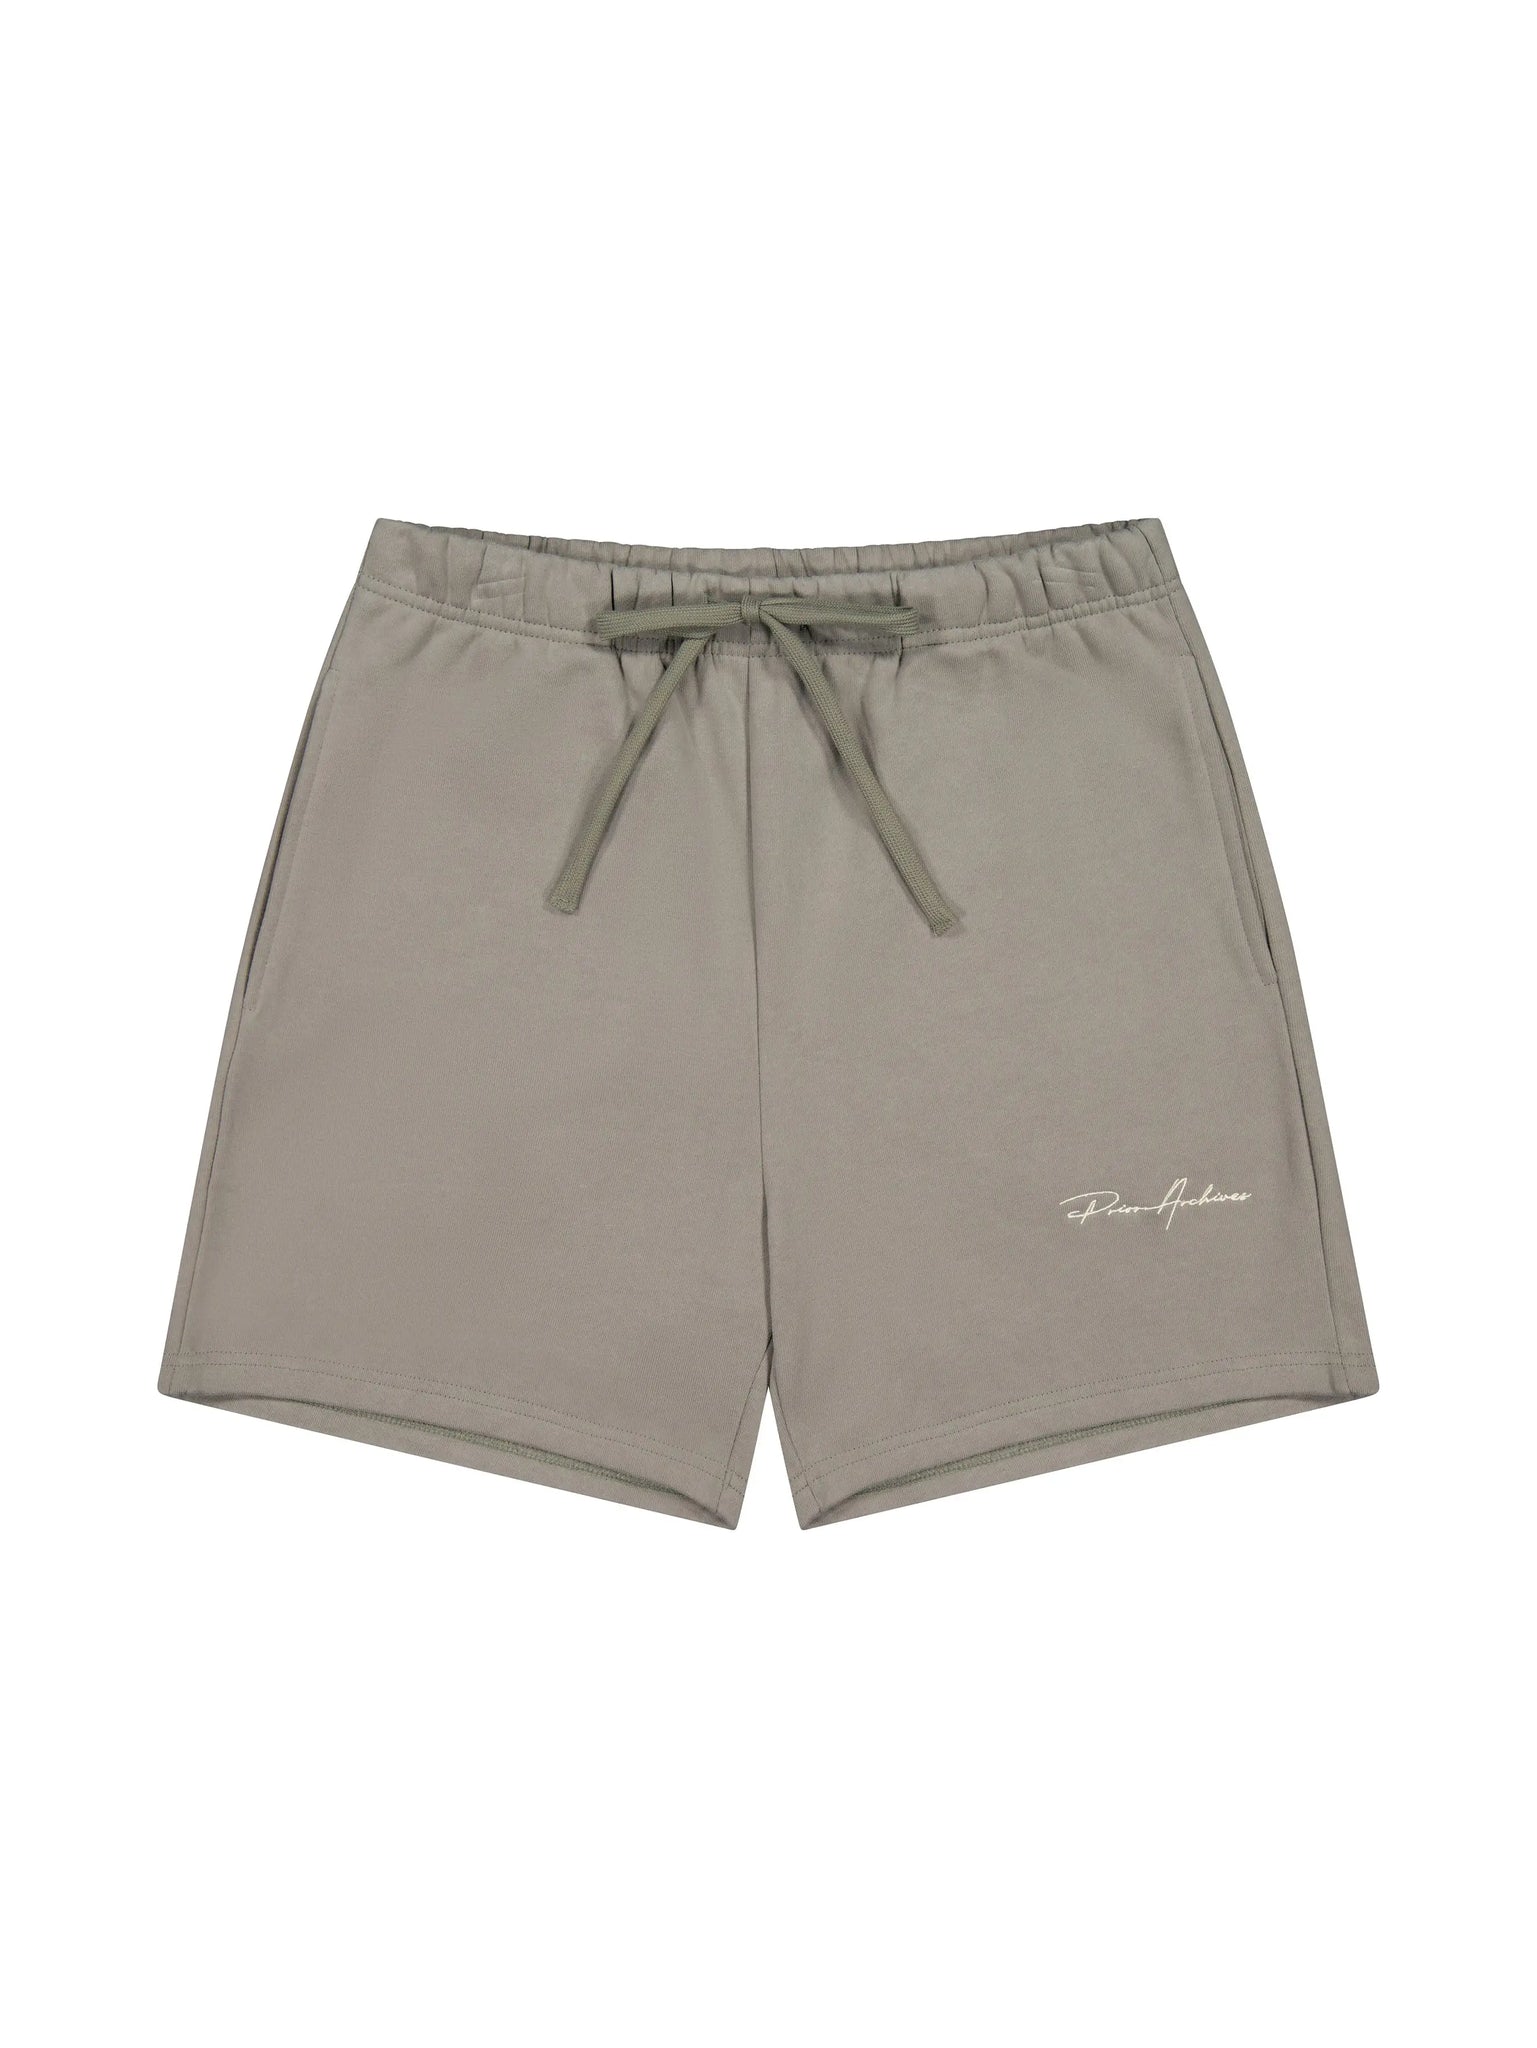 Prior Embroidery Logo Fitted Sweatshorts Cinder in Auckland, New Zealand - Shop name